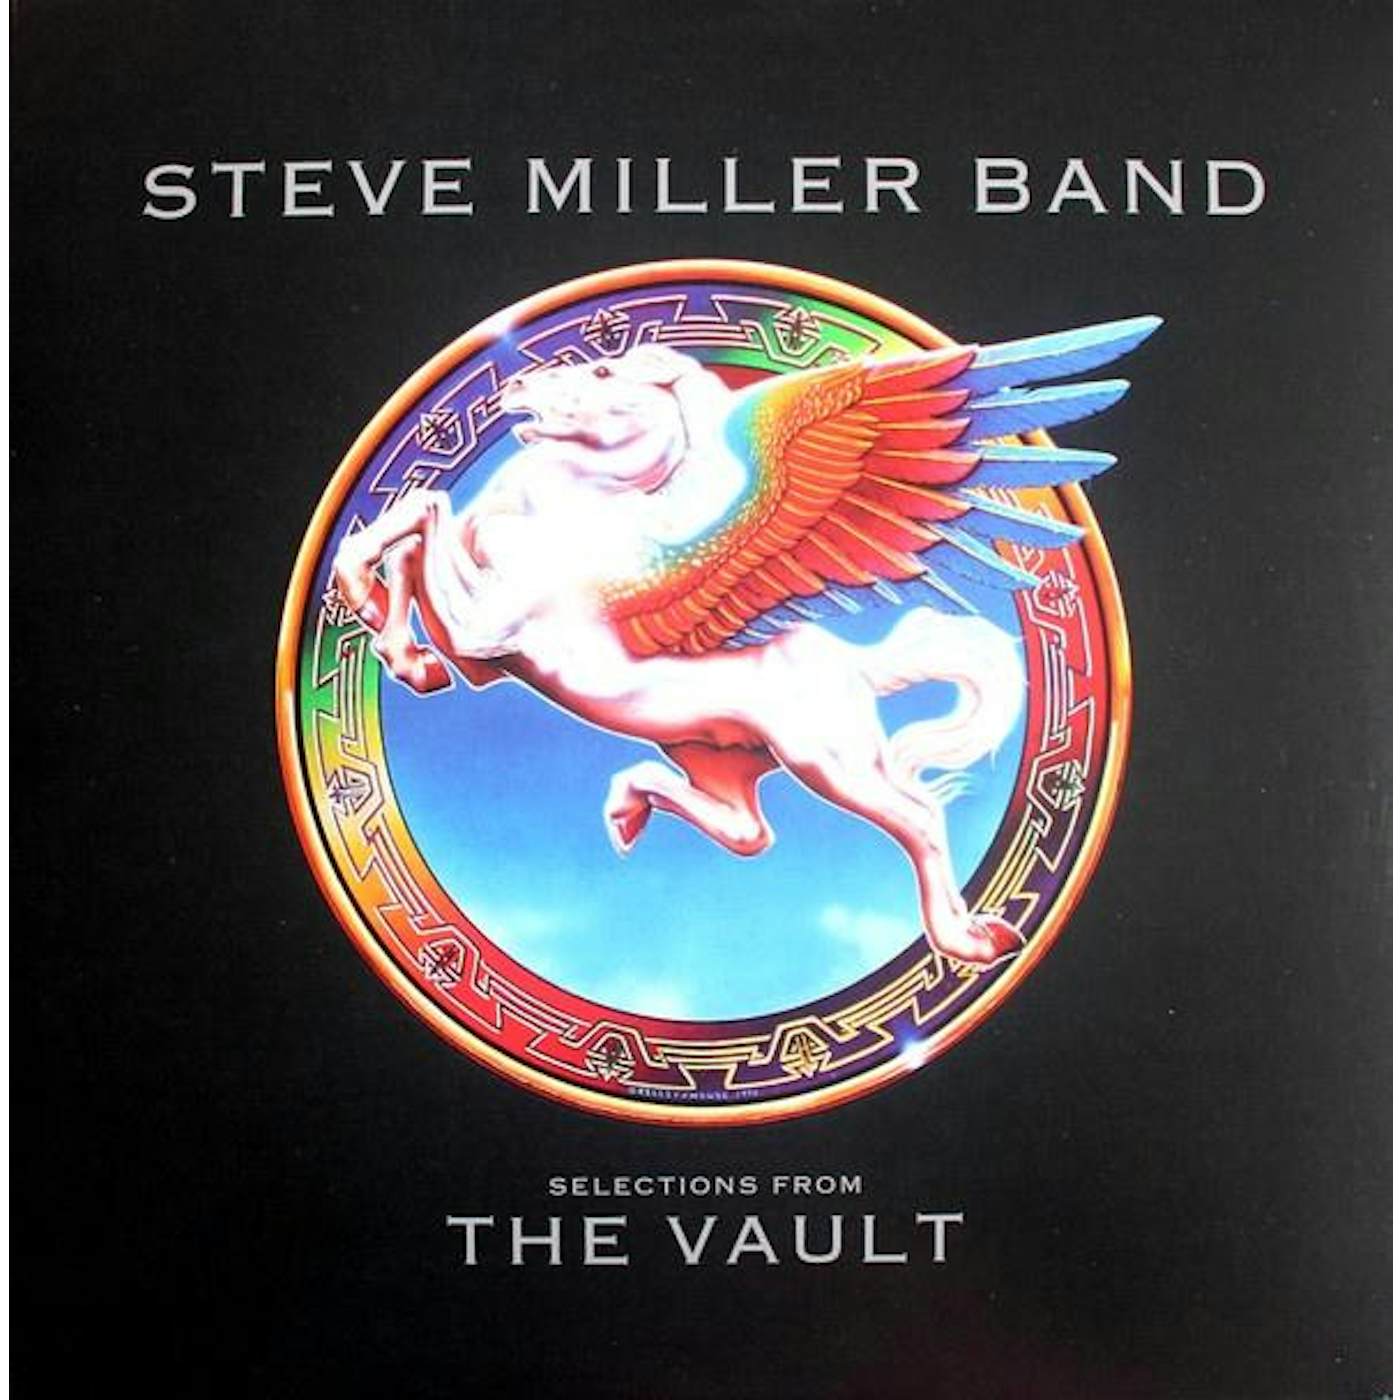 Steve Miller Band SELECTIONS FROM THE VAULT Vinyl Record